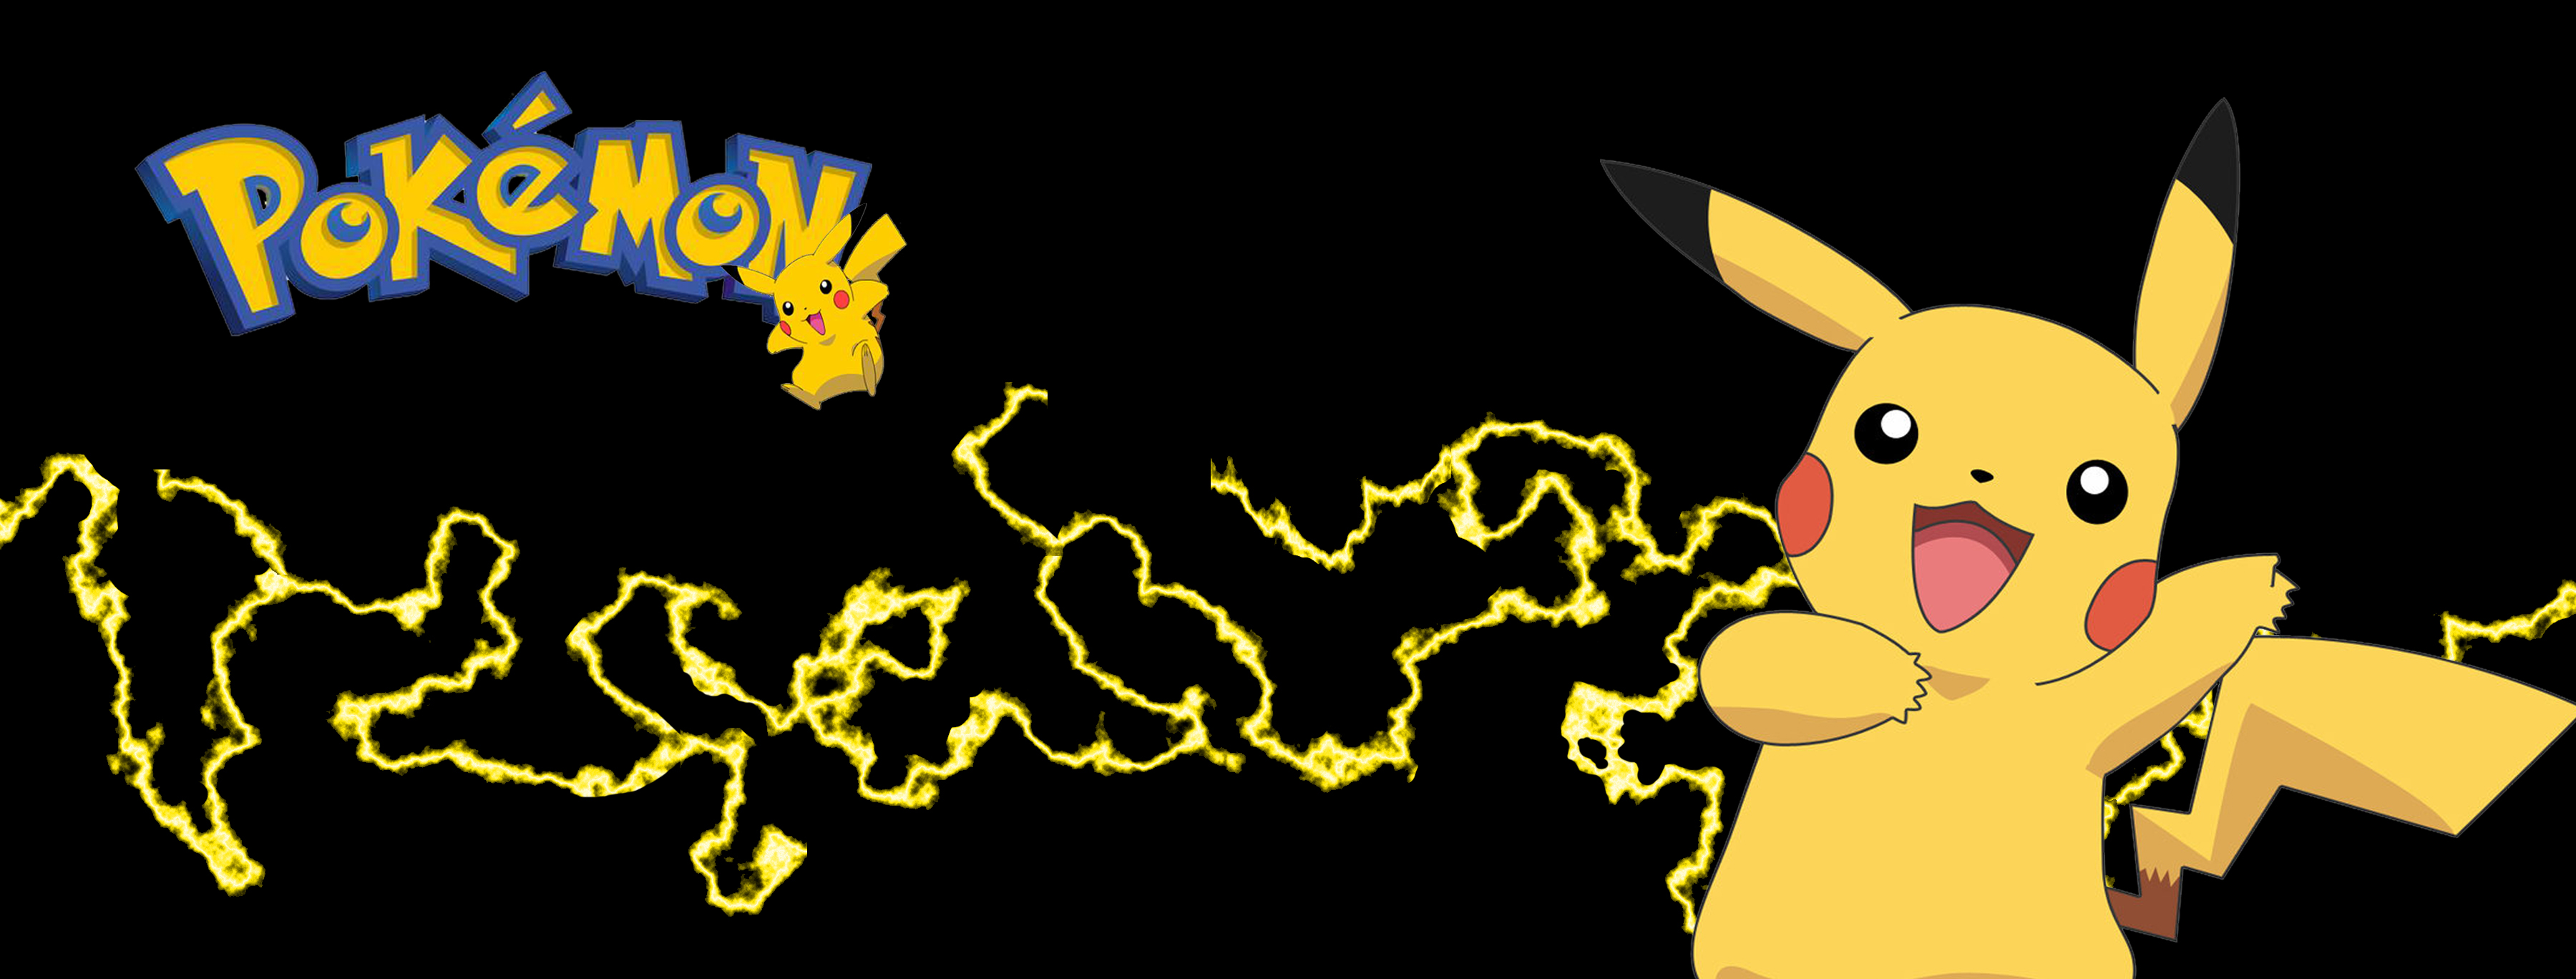 Pikachu Wallpaper For Full HD Pictures